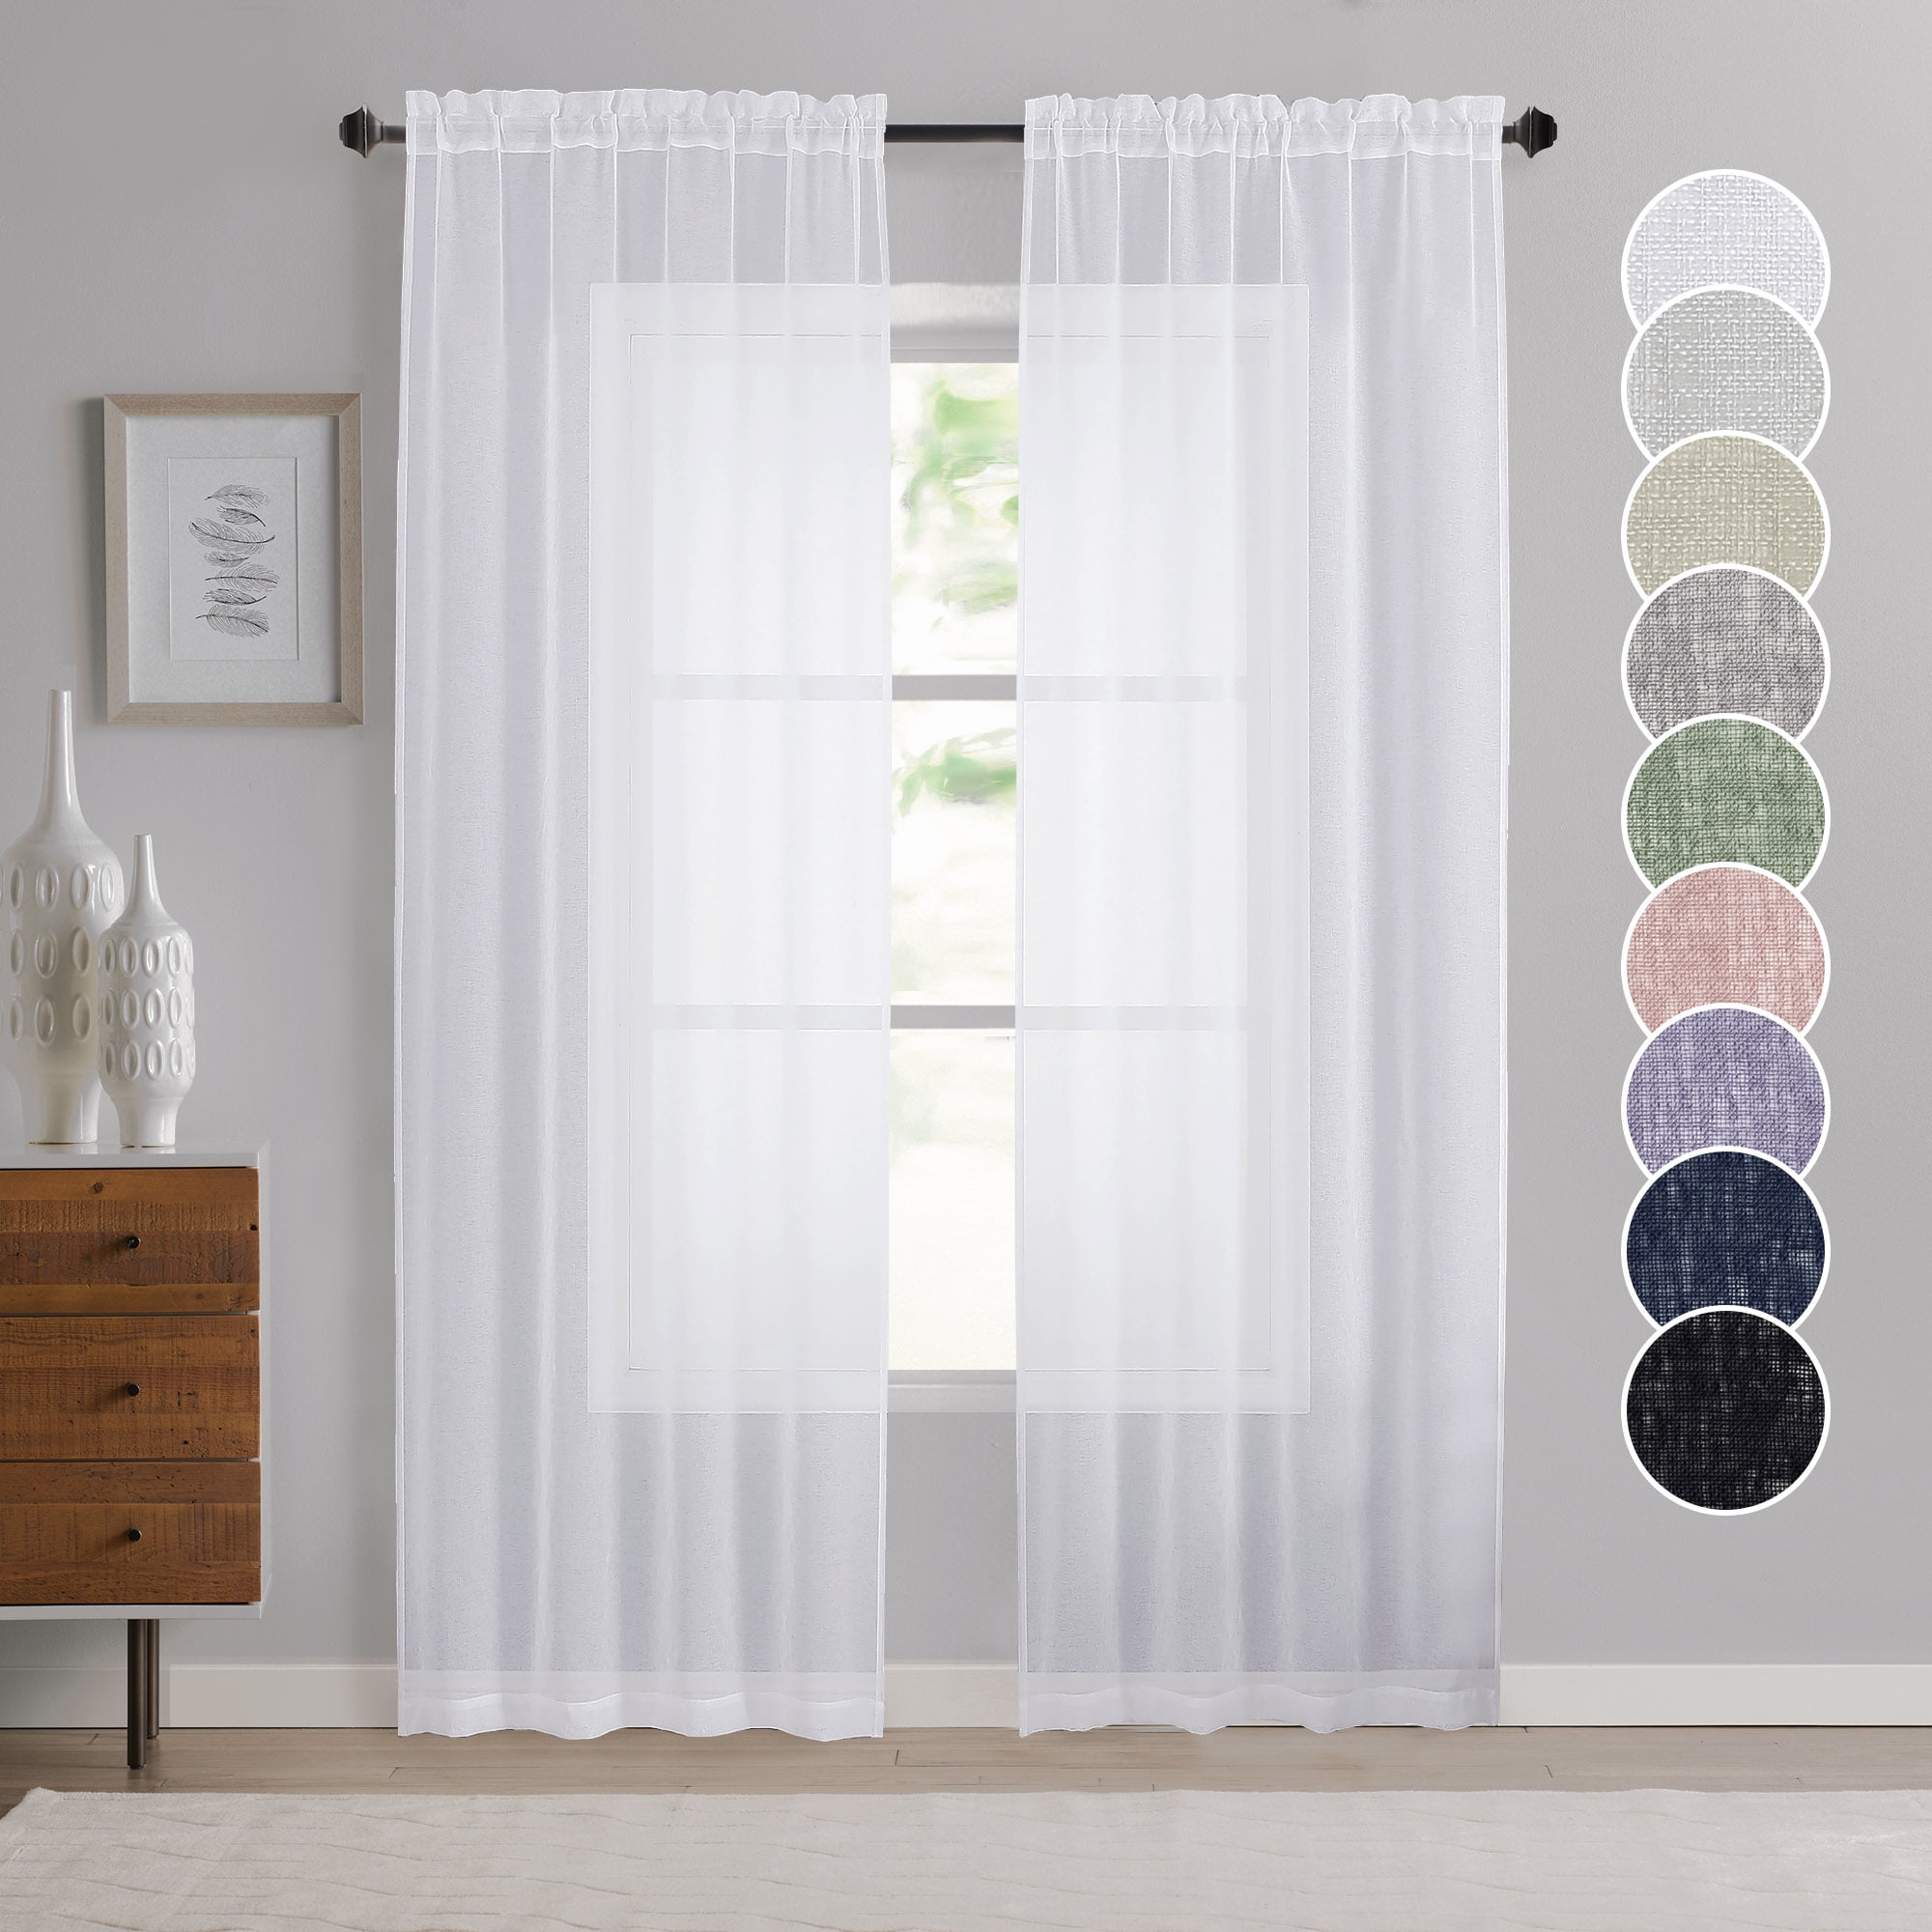 OVZME Dolly White Sheer Curtains 84 Inches Long 2 Pack,Light